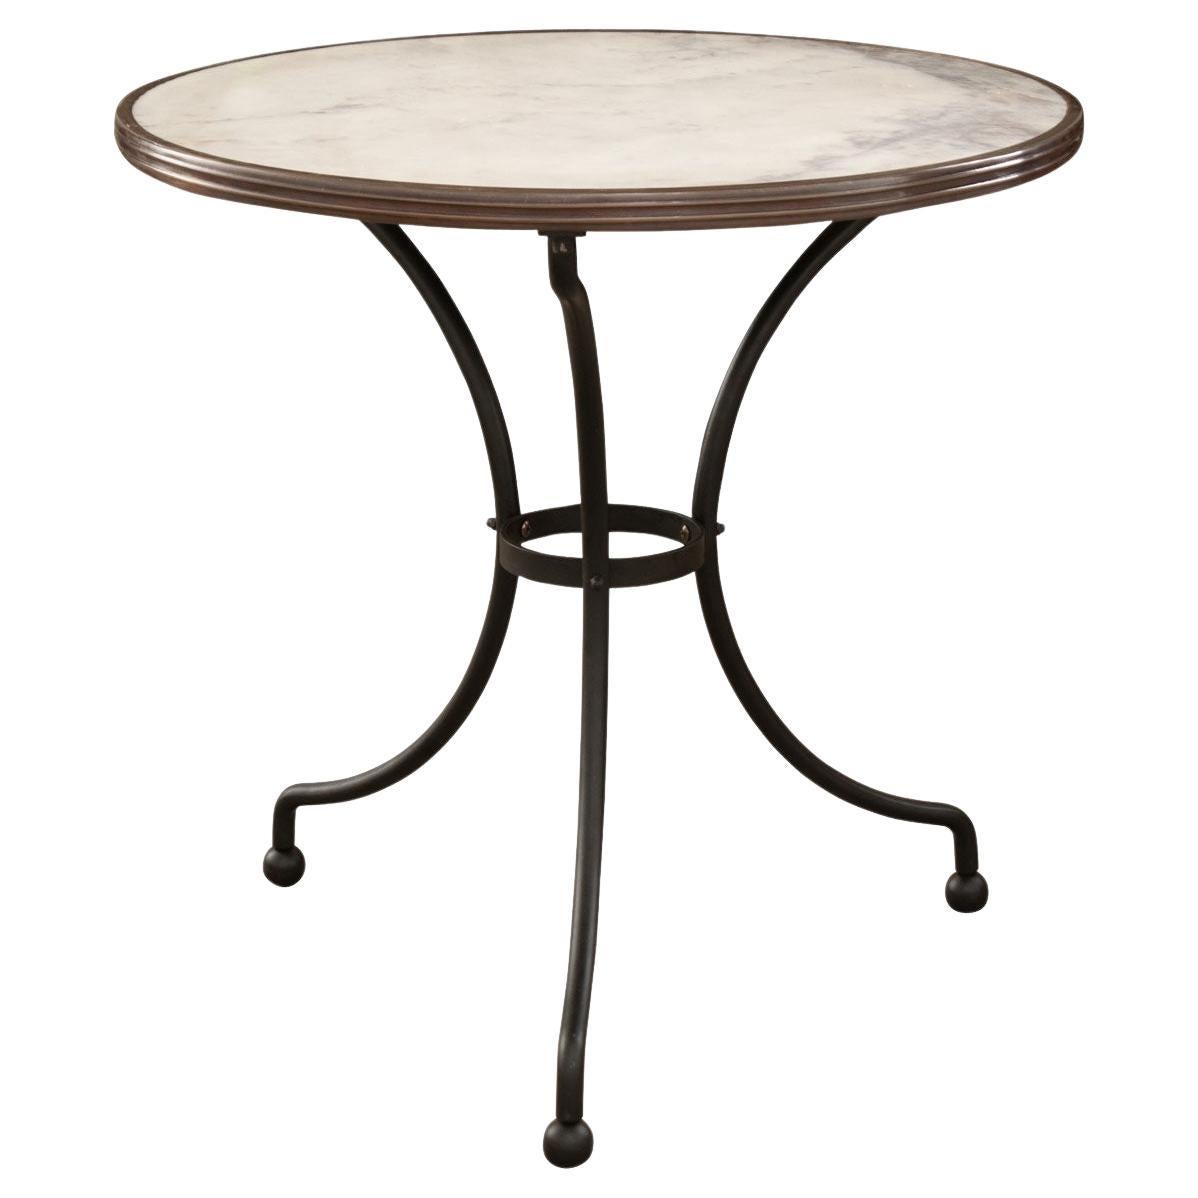 Reproduction French Cafe Table For Sale